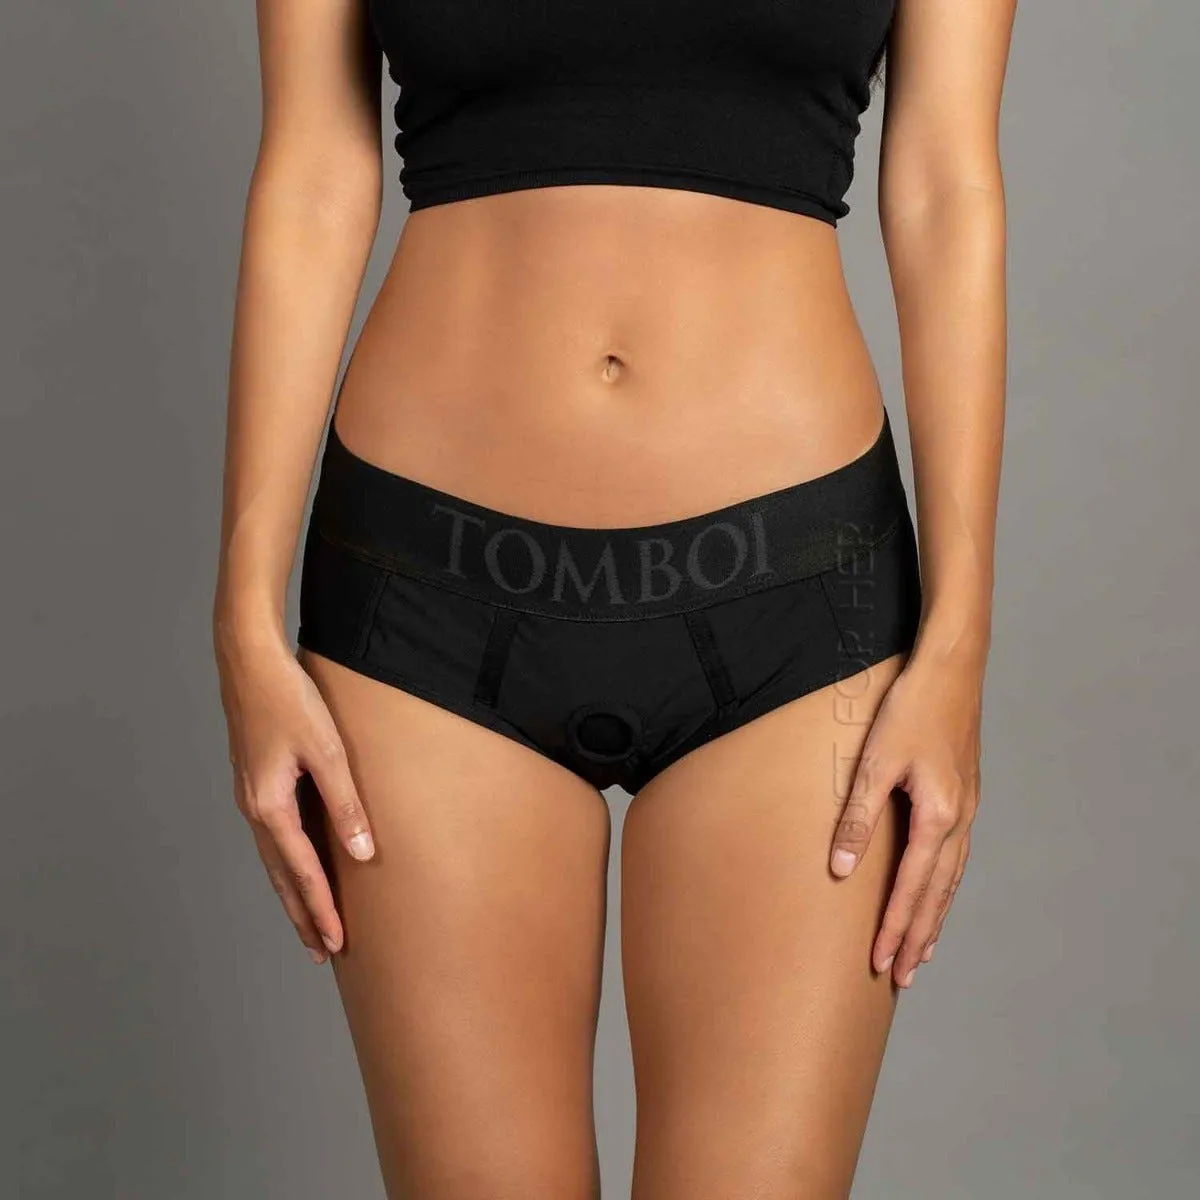 TOMBOI ORIGINAL BRIEF STRAP-ON O'RING HARNESS from Wet For Her